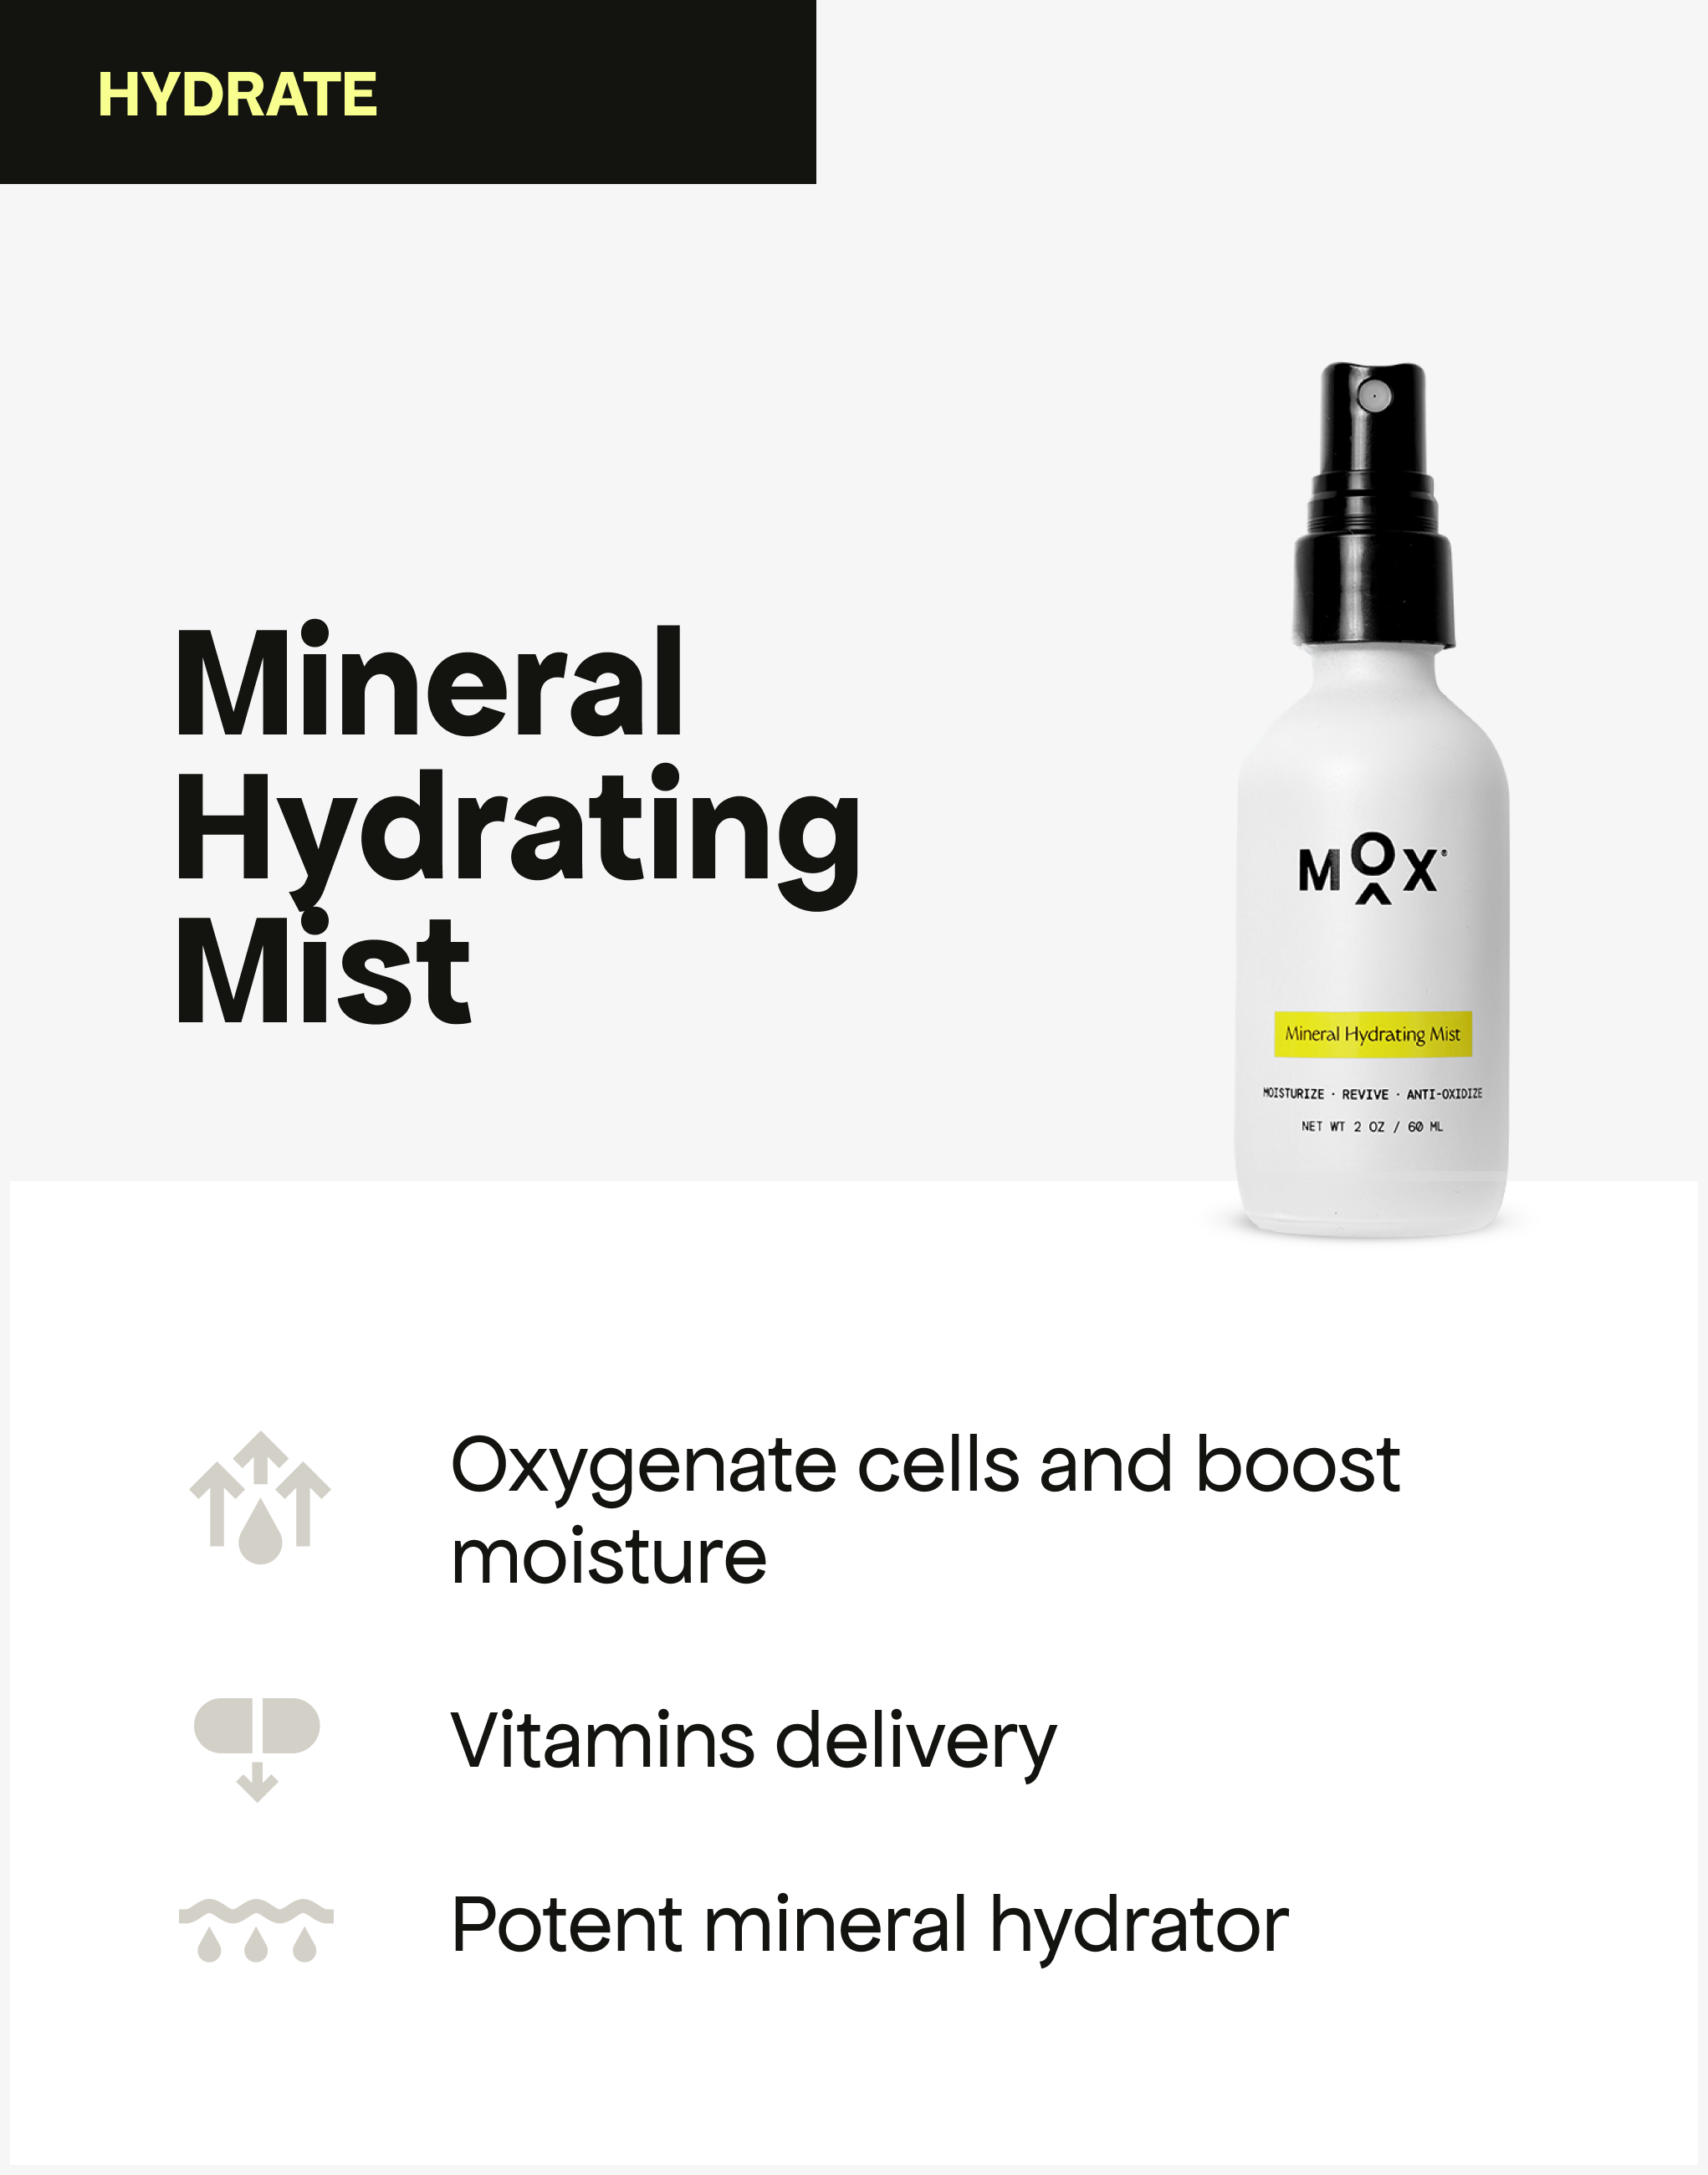 The MOX Mineral Hydrating Mist Brews Confidence